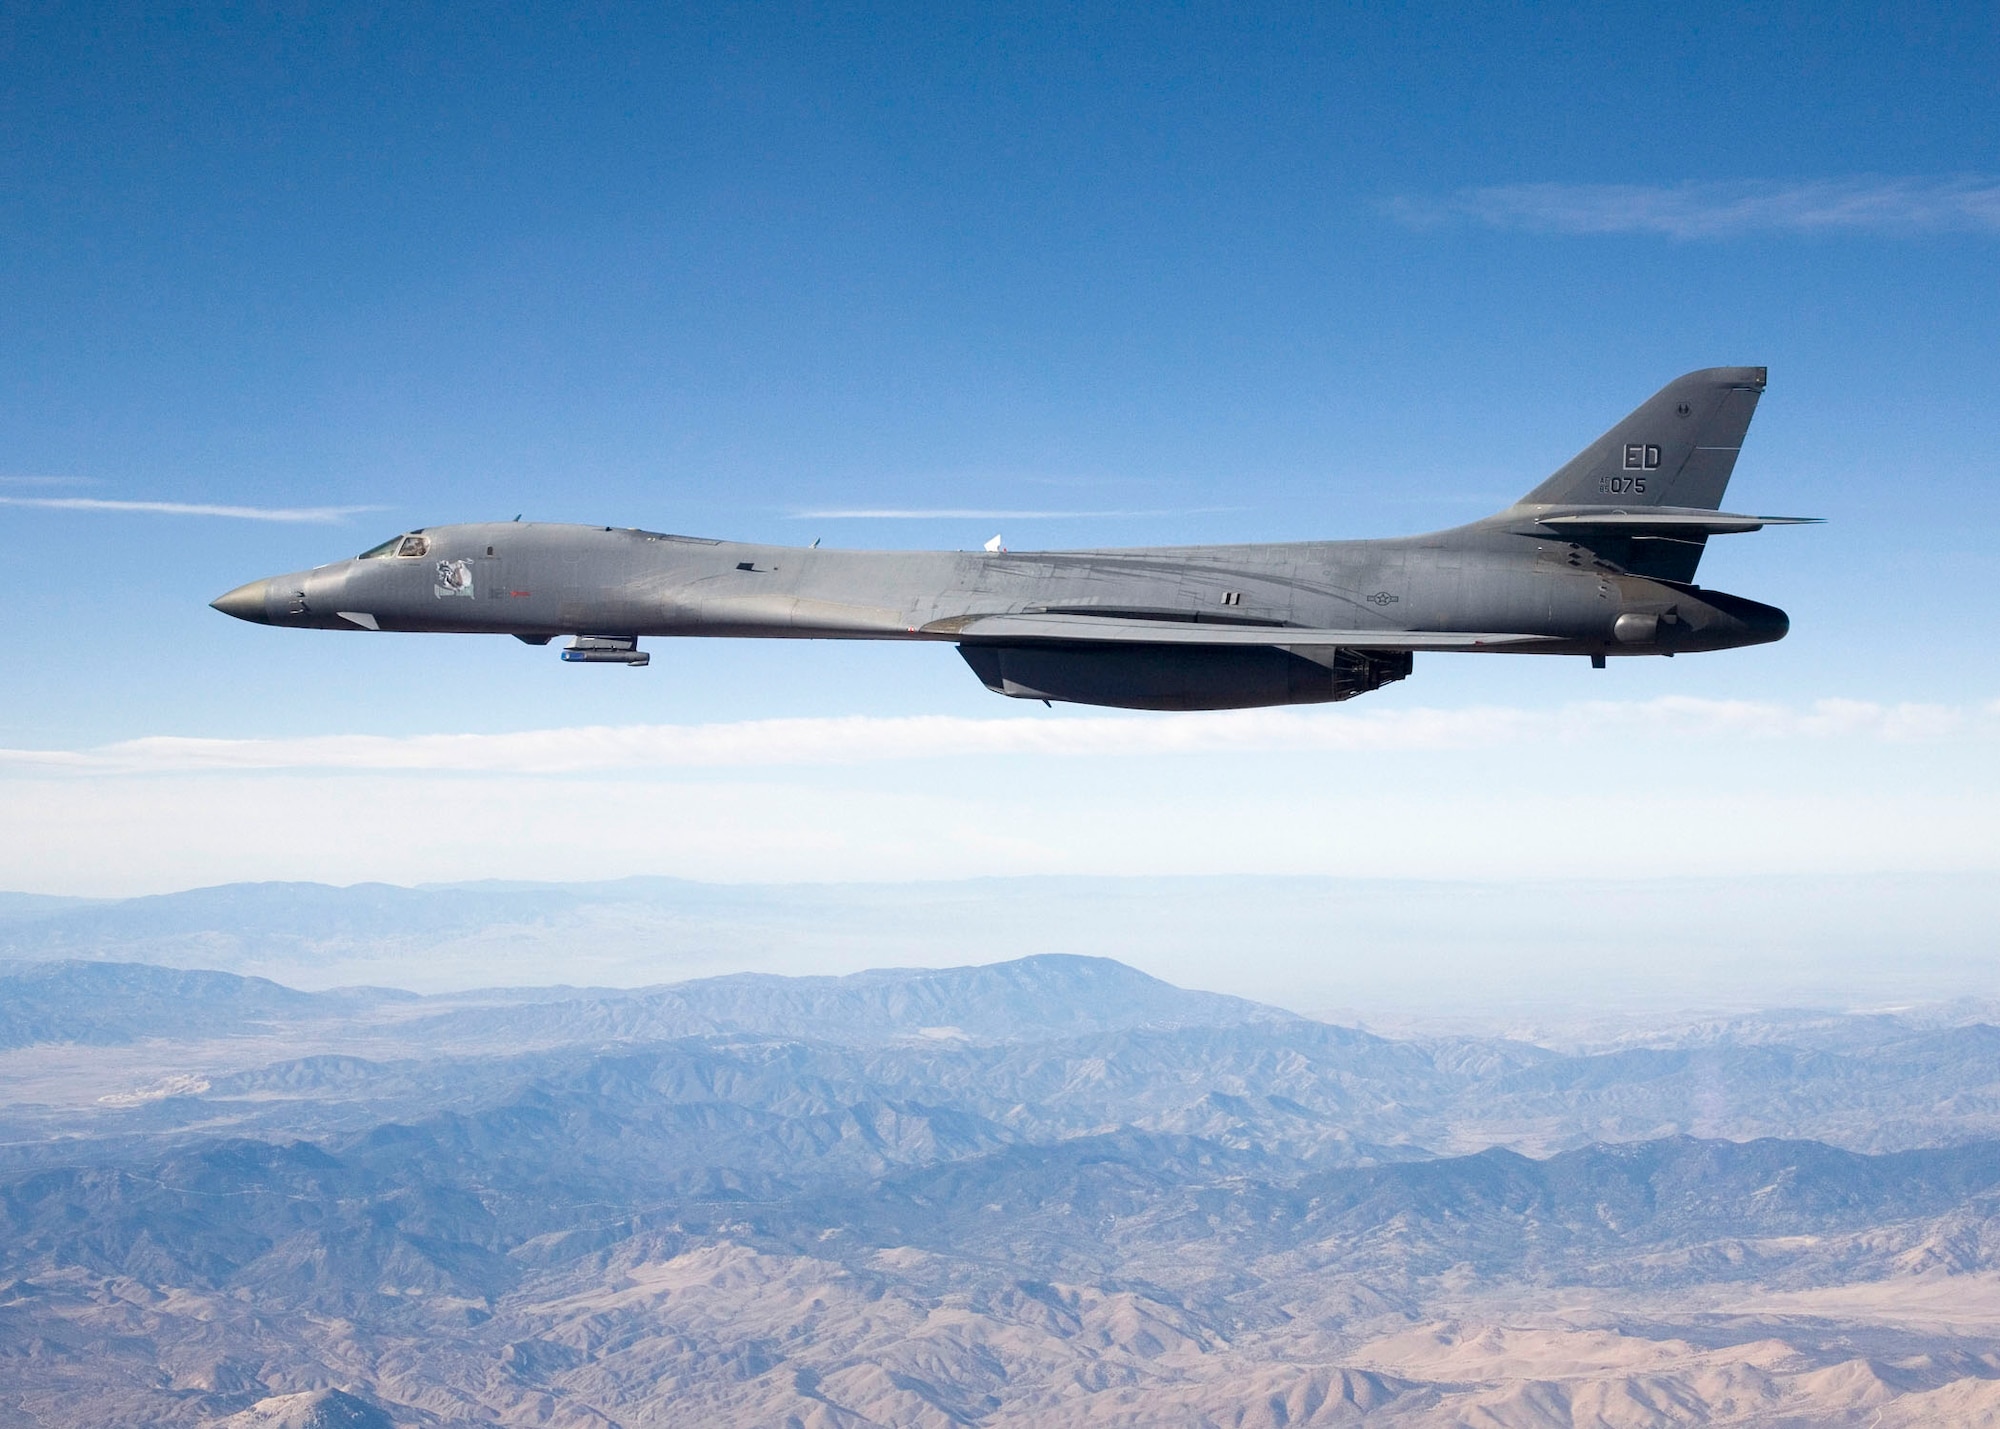 A B-1B Lancer carries the Sniper pod on its belly as it flies over Edwards' skies during a flight test here. The 419th Flight Test Squadron testers recently concluded the initial development of the Sniper pod installed on a B-1B here recently. The Sniper pod is an advanced targeting pod with a multi-sensor system that increases the aircraft's self-targeting capability. (Photo by Steve Zapka)